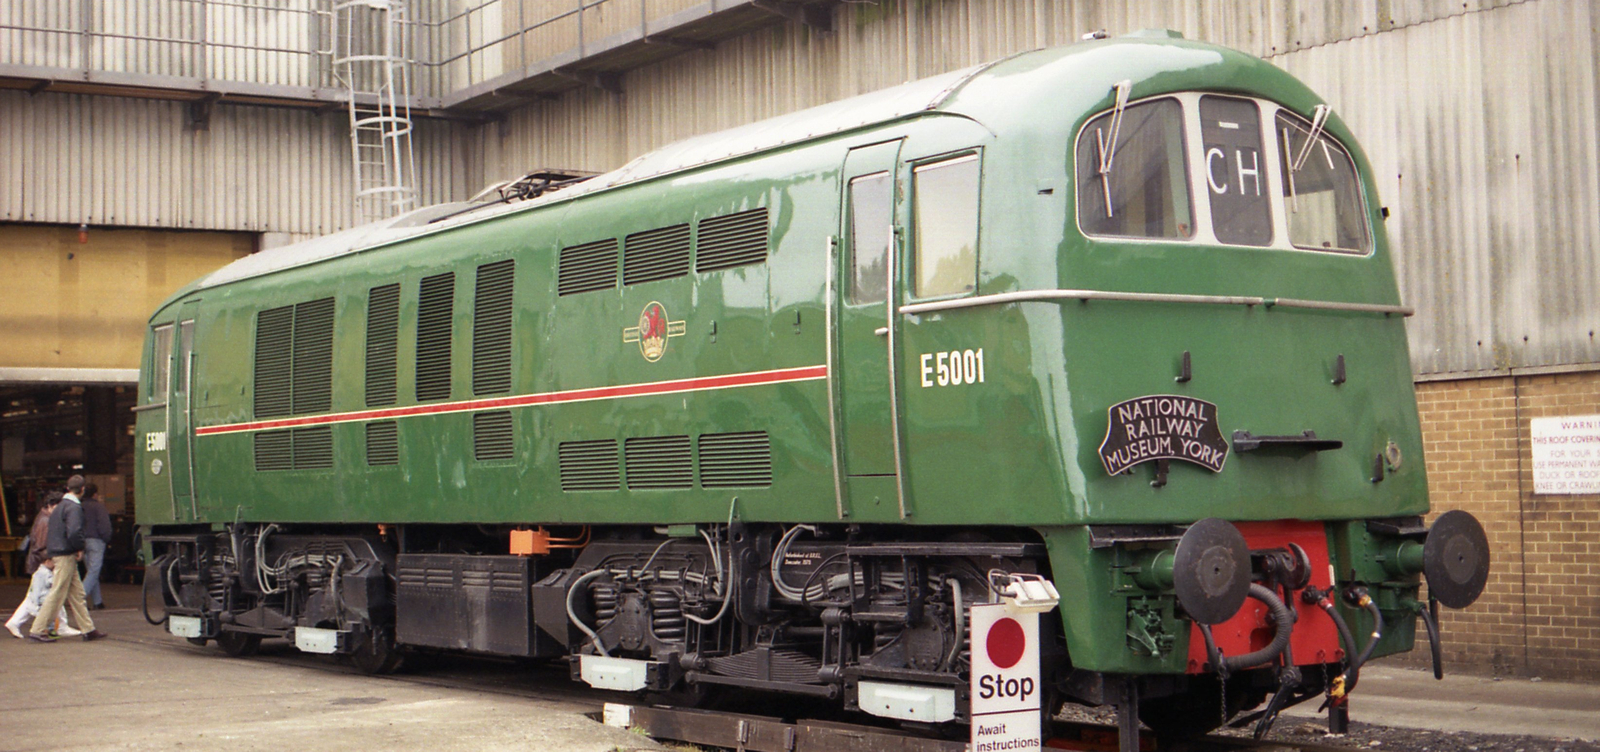 E5001 in December 1991 at Ashford works' 150th anniversary celebrations